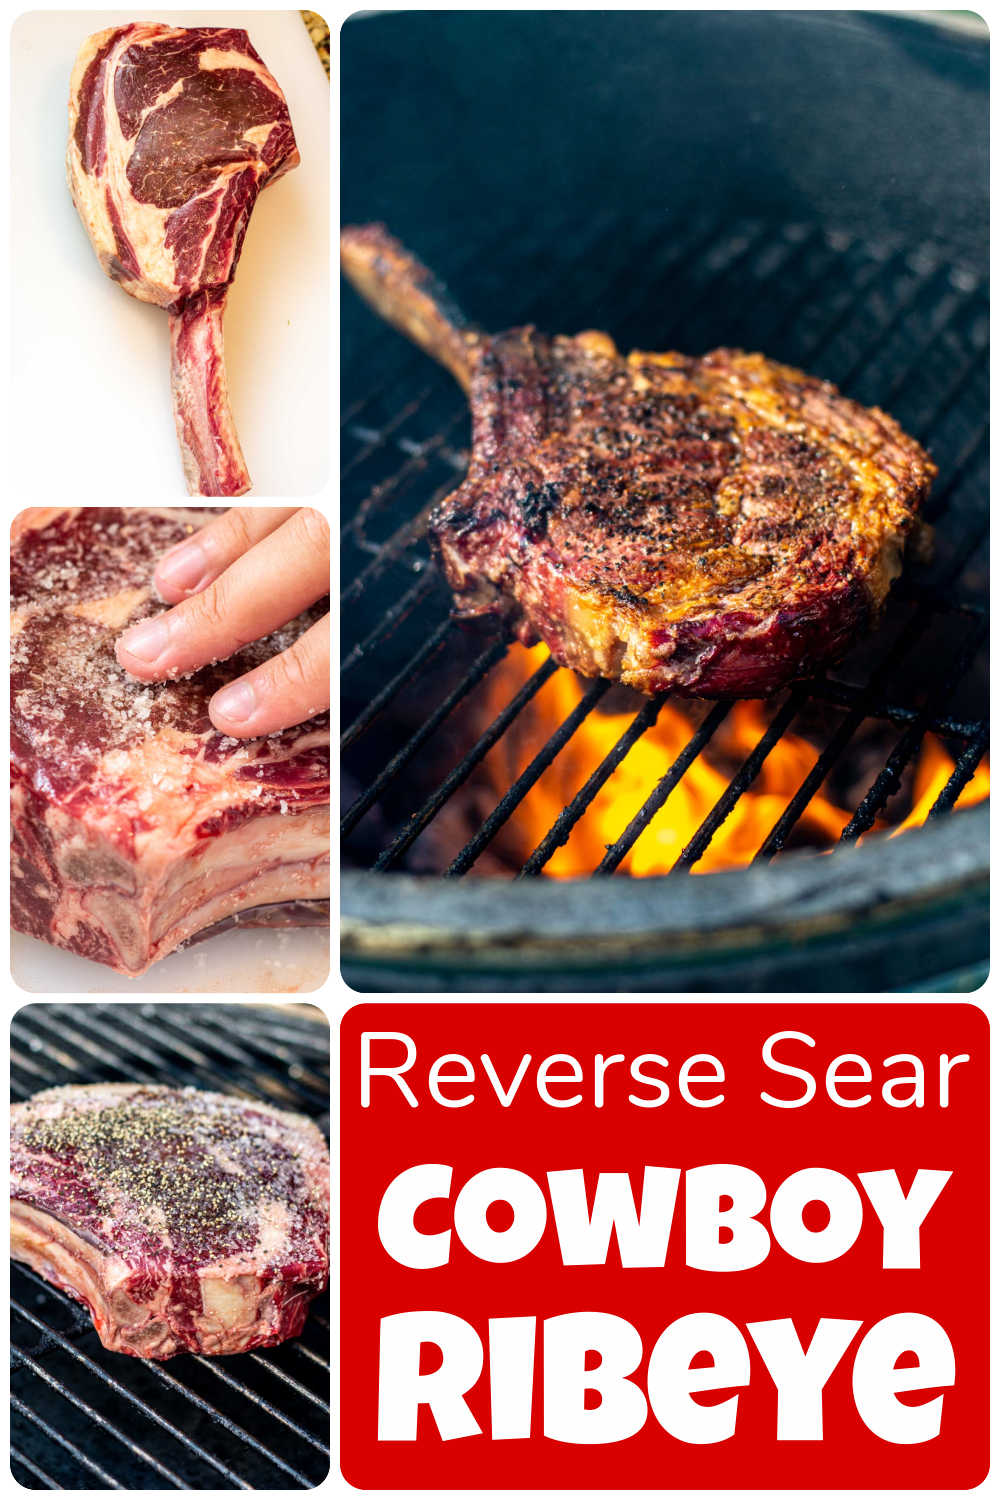 How to Grill a Reverse Sear Cowboy Ribeye {60 Minutes}